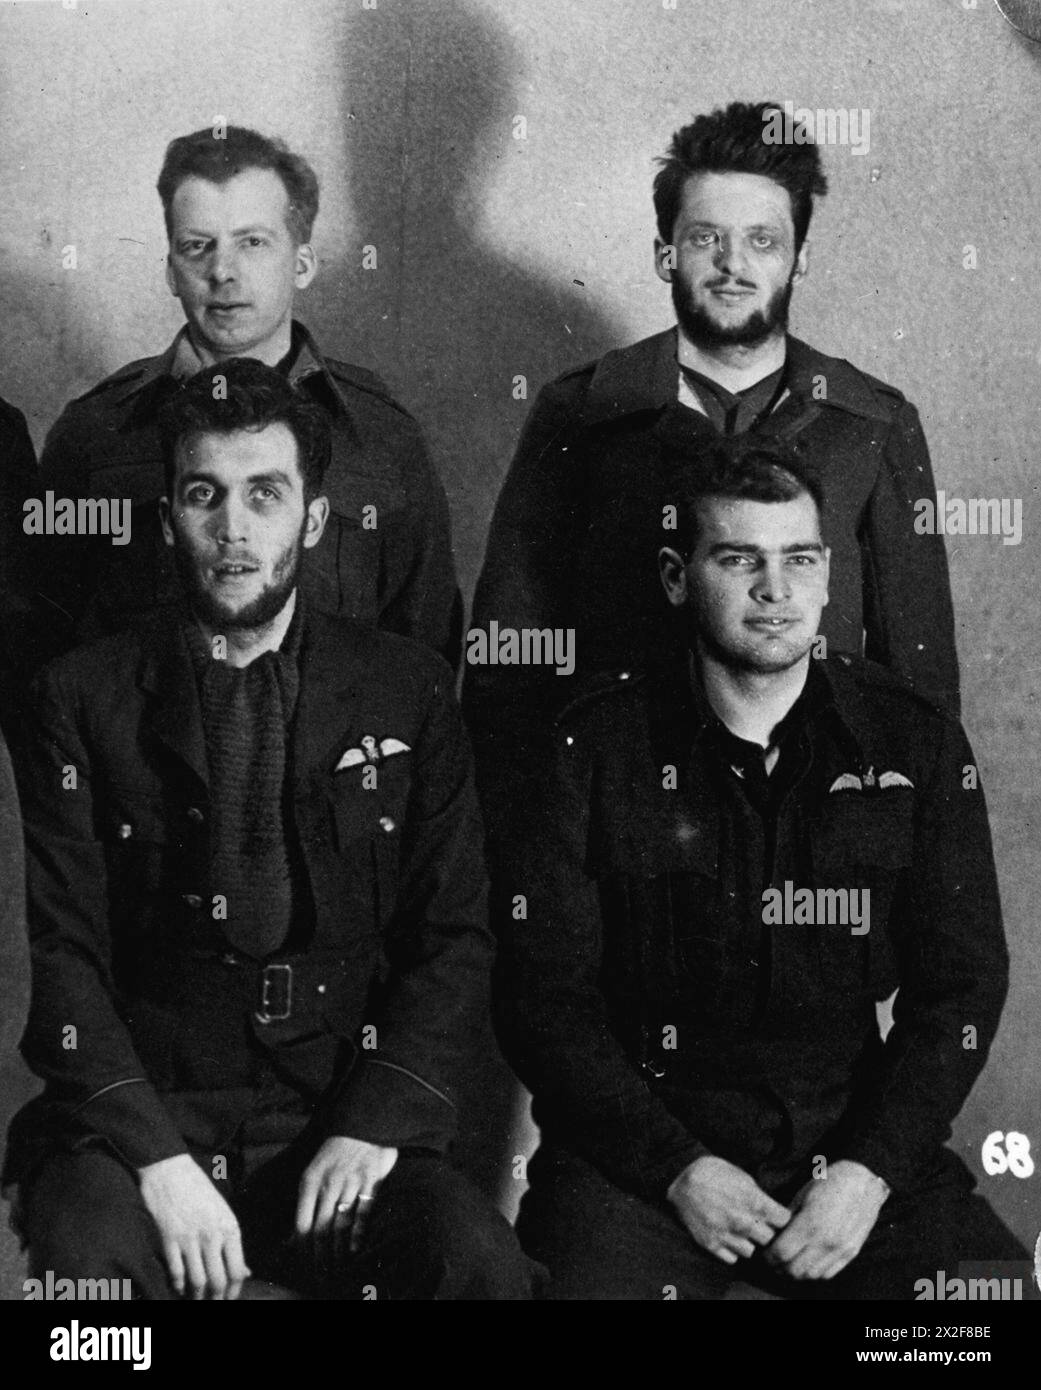 ALLIED PRISONERS OF WAR IN GERMANY, 1939-1945 - Four Canadian POWs at Stalag Luft III, Sagan.Top, left to right - Sam Sangster; John Gordon 'Scruffy' Weir.Below, left to right - Flight Lieutenant Clarke Wallace 'Wally' Floody; Flying Officer Henry 'Hank' Birkland, one of the Great Escapers murdered by the Gestapo Royal Canadian Air Force, Floody, Clarke Wallace 'Wally', Birkland, Henry 'Hank' Stock Photo